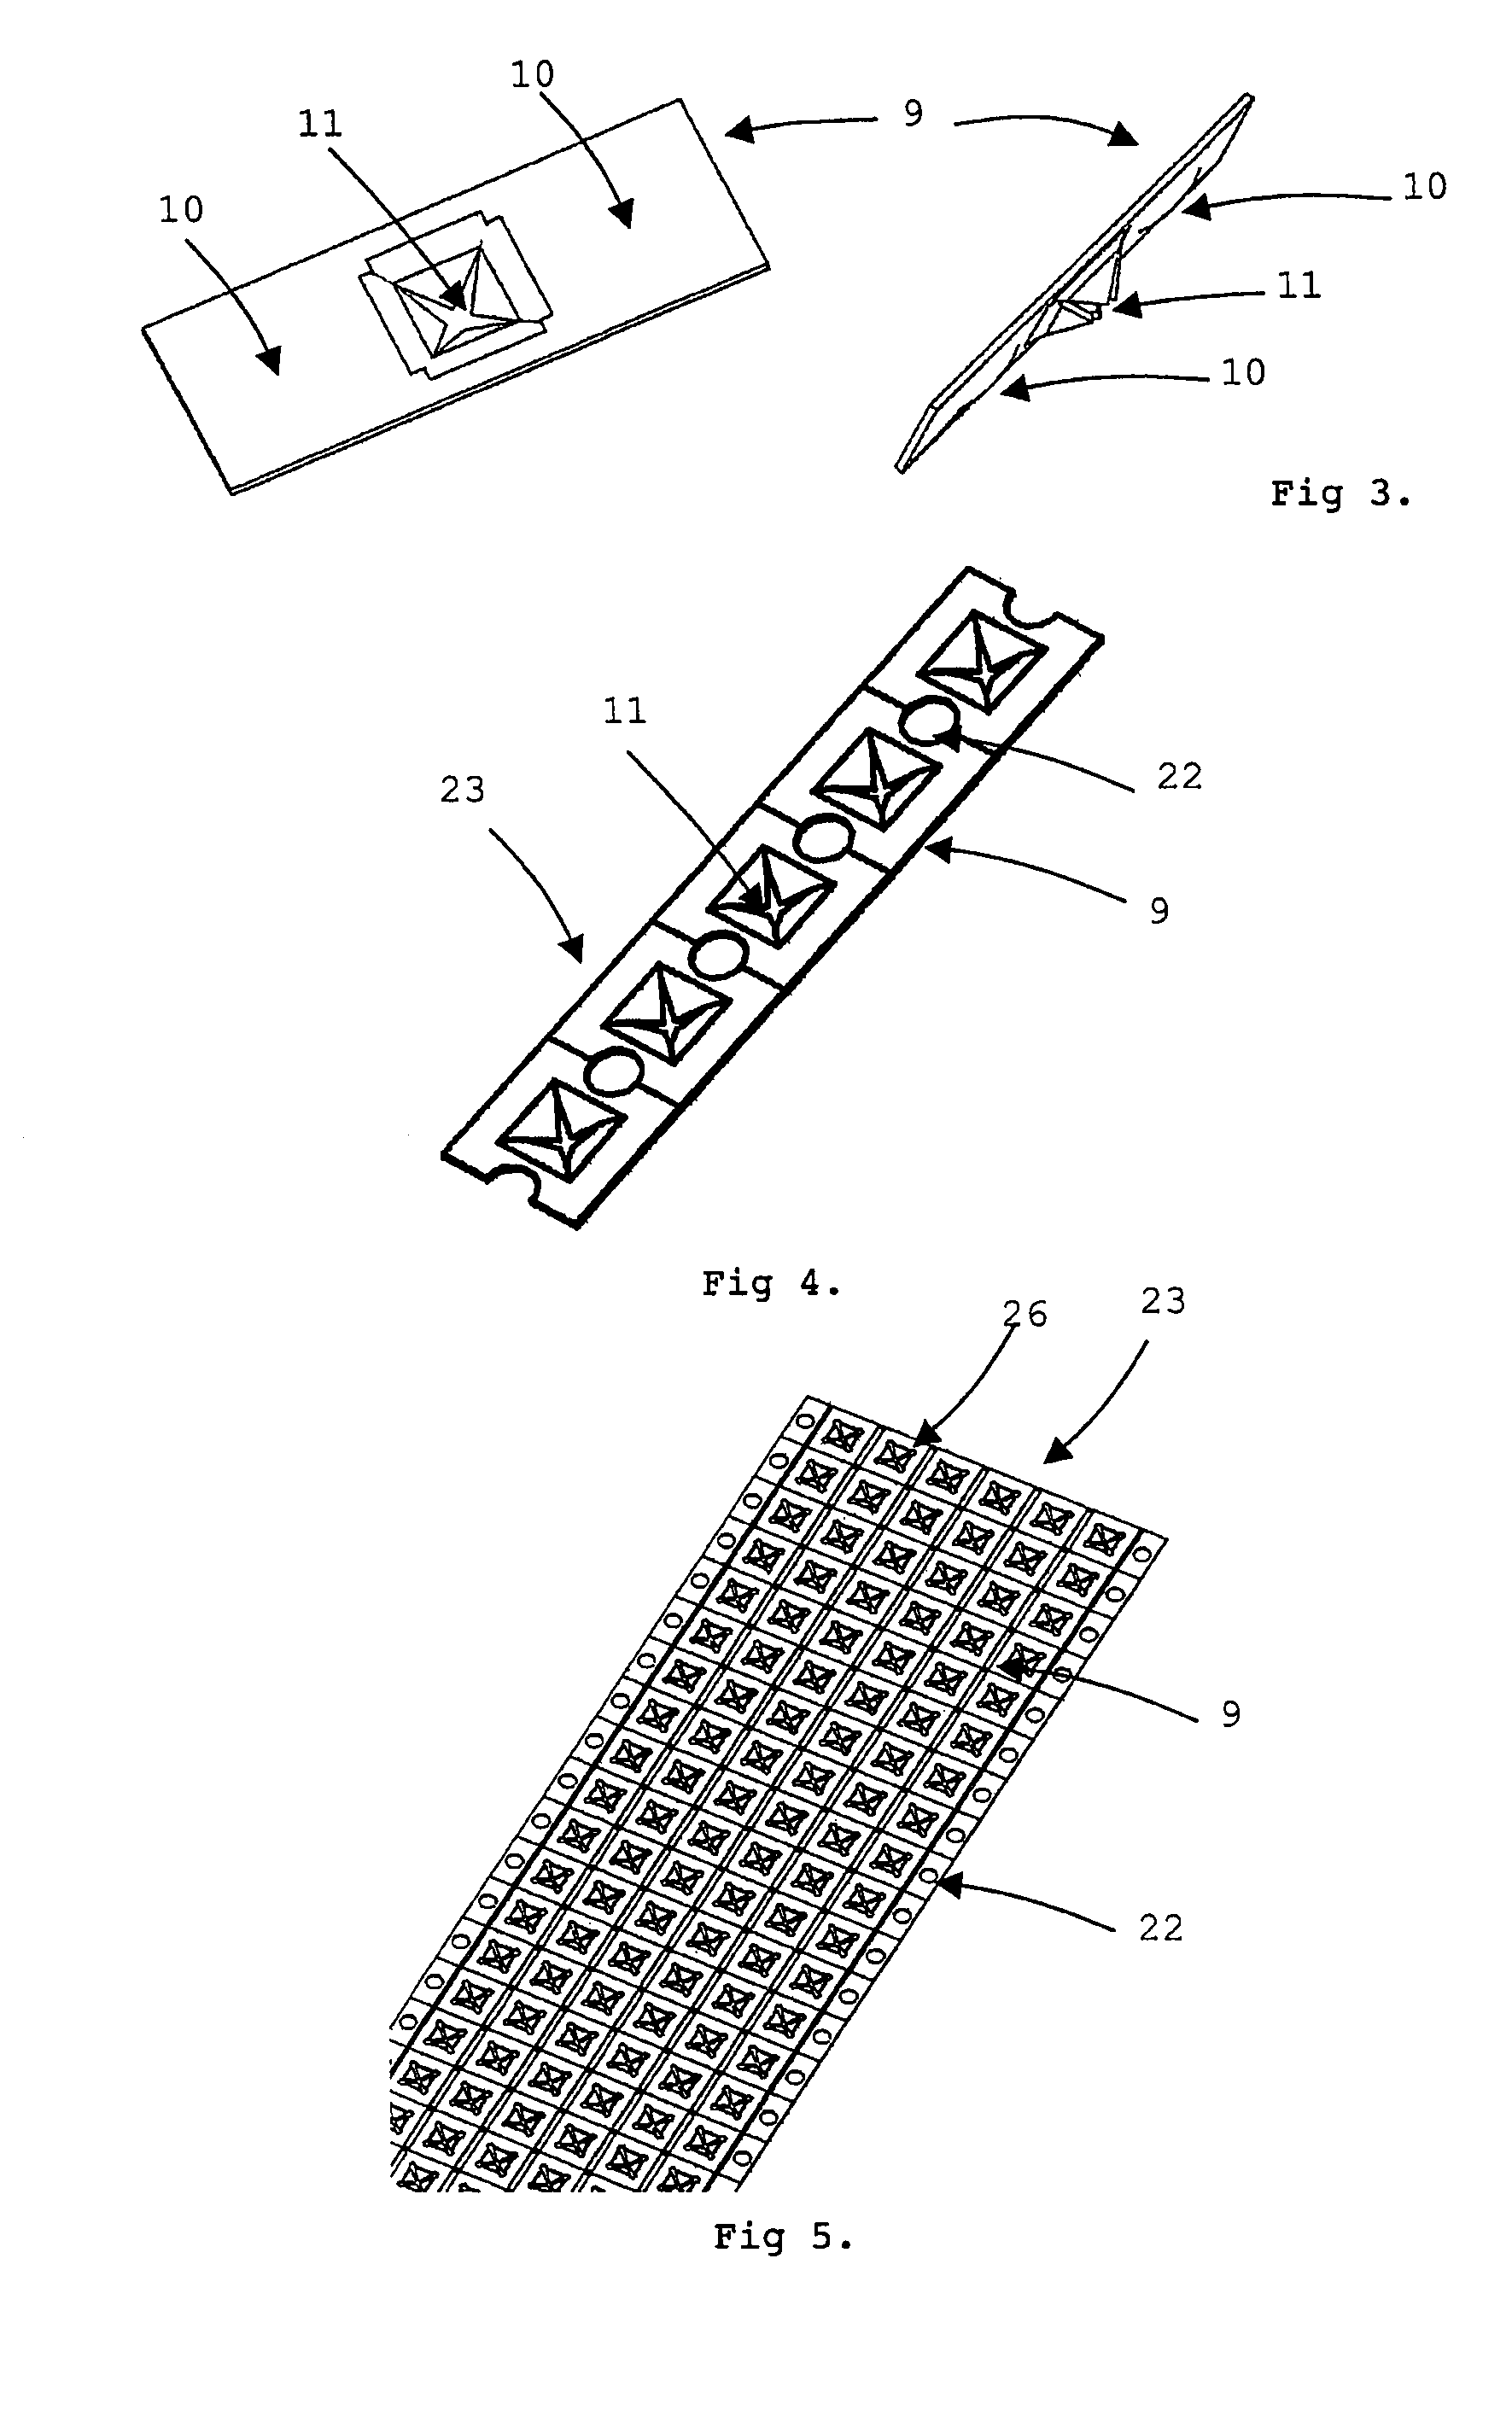 Method for connecting an electric actuator to a printed circuit board